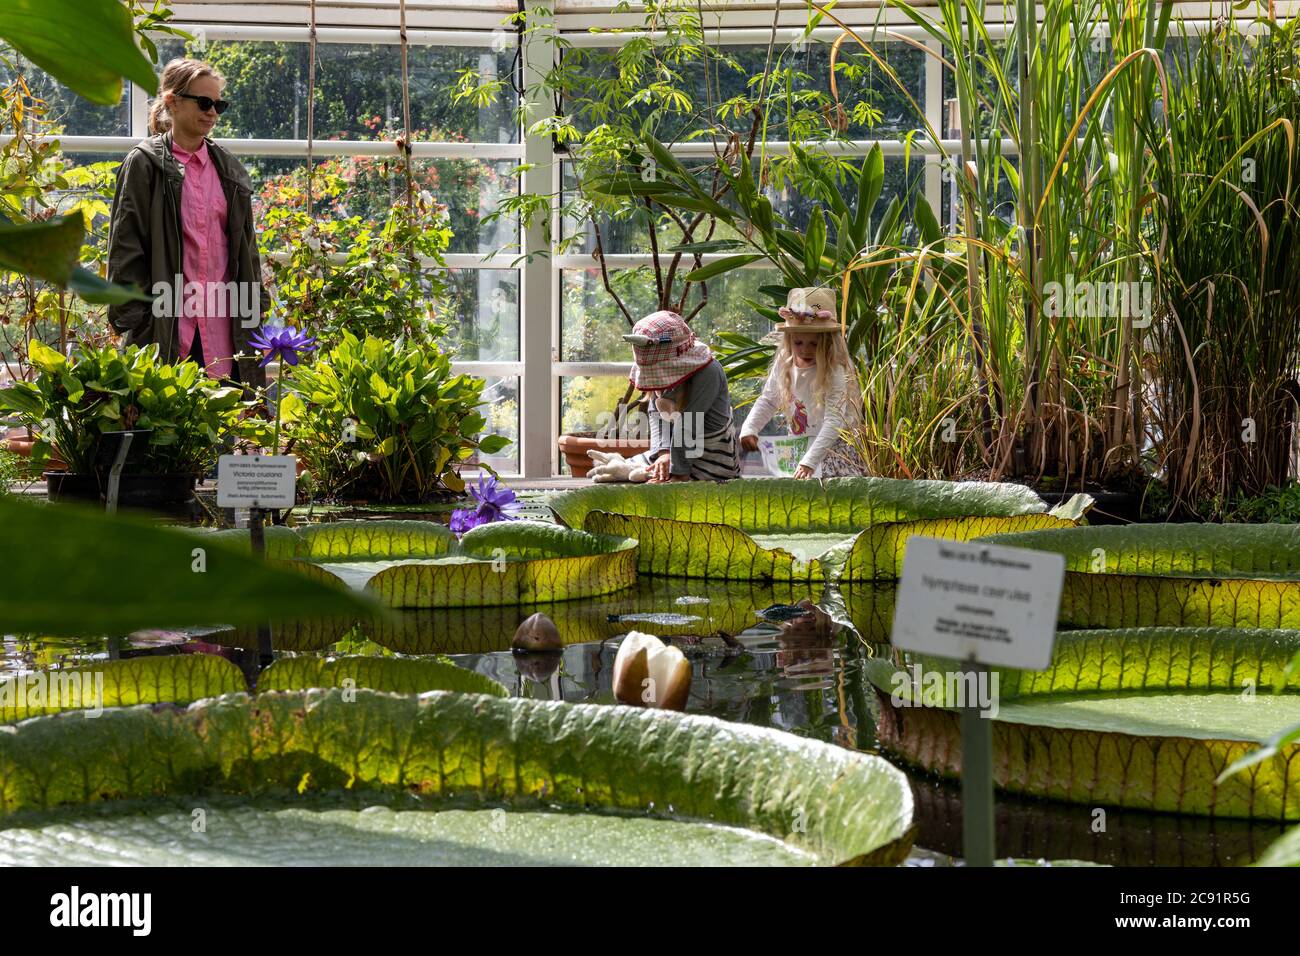 Little girls in summer hats and adult woman in sunglasses at Waterlily Room of Kaisaniemi Botanic Garden in Helsinki, Finland Stock Photo